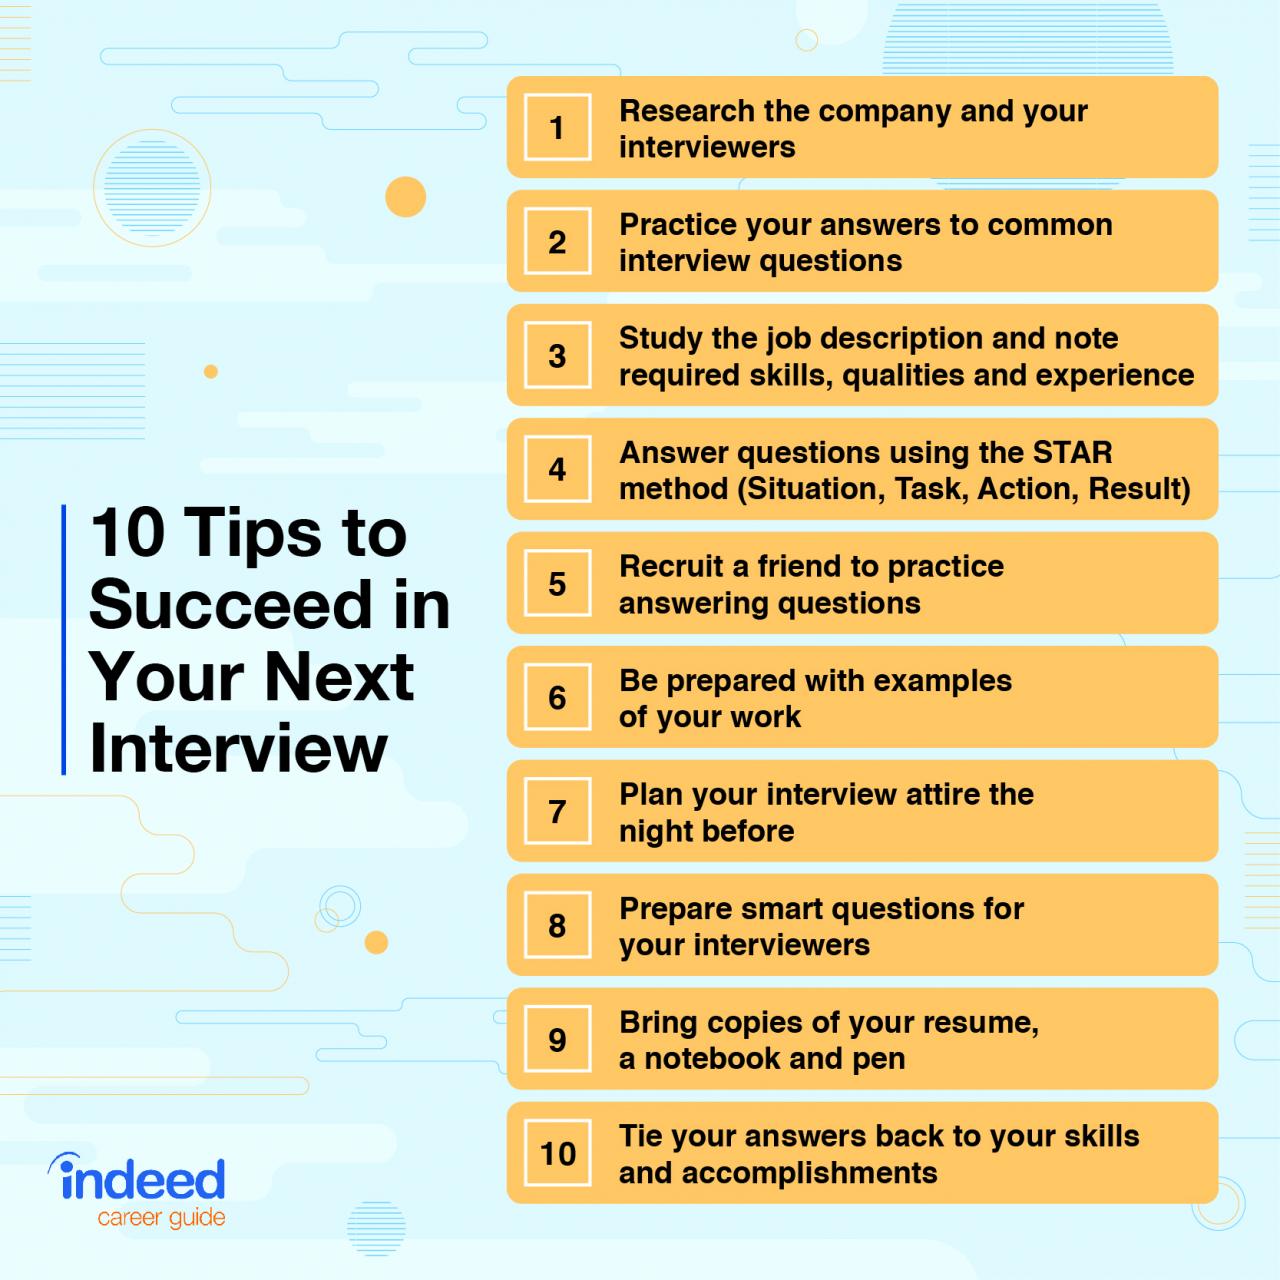 Follow up questions during an interview